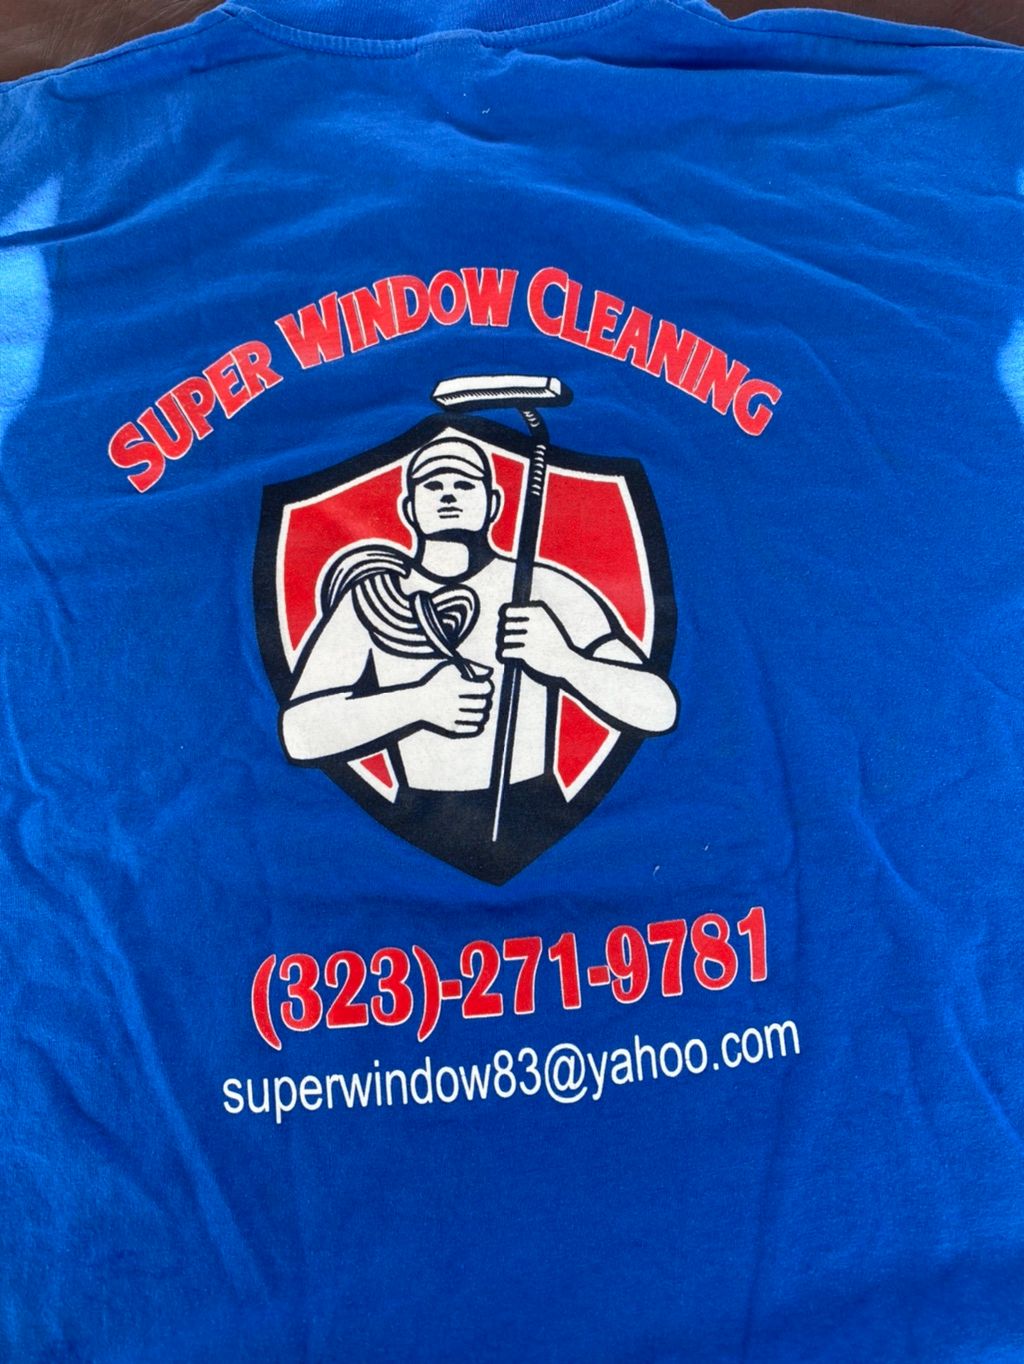 Superwindow Cleaning